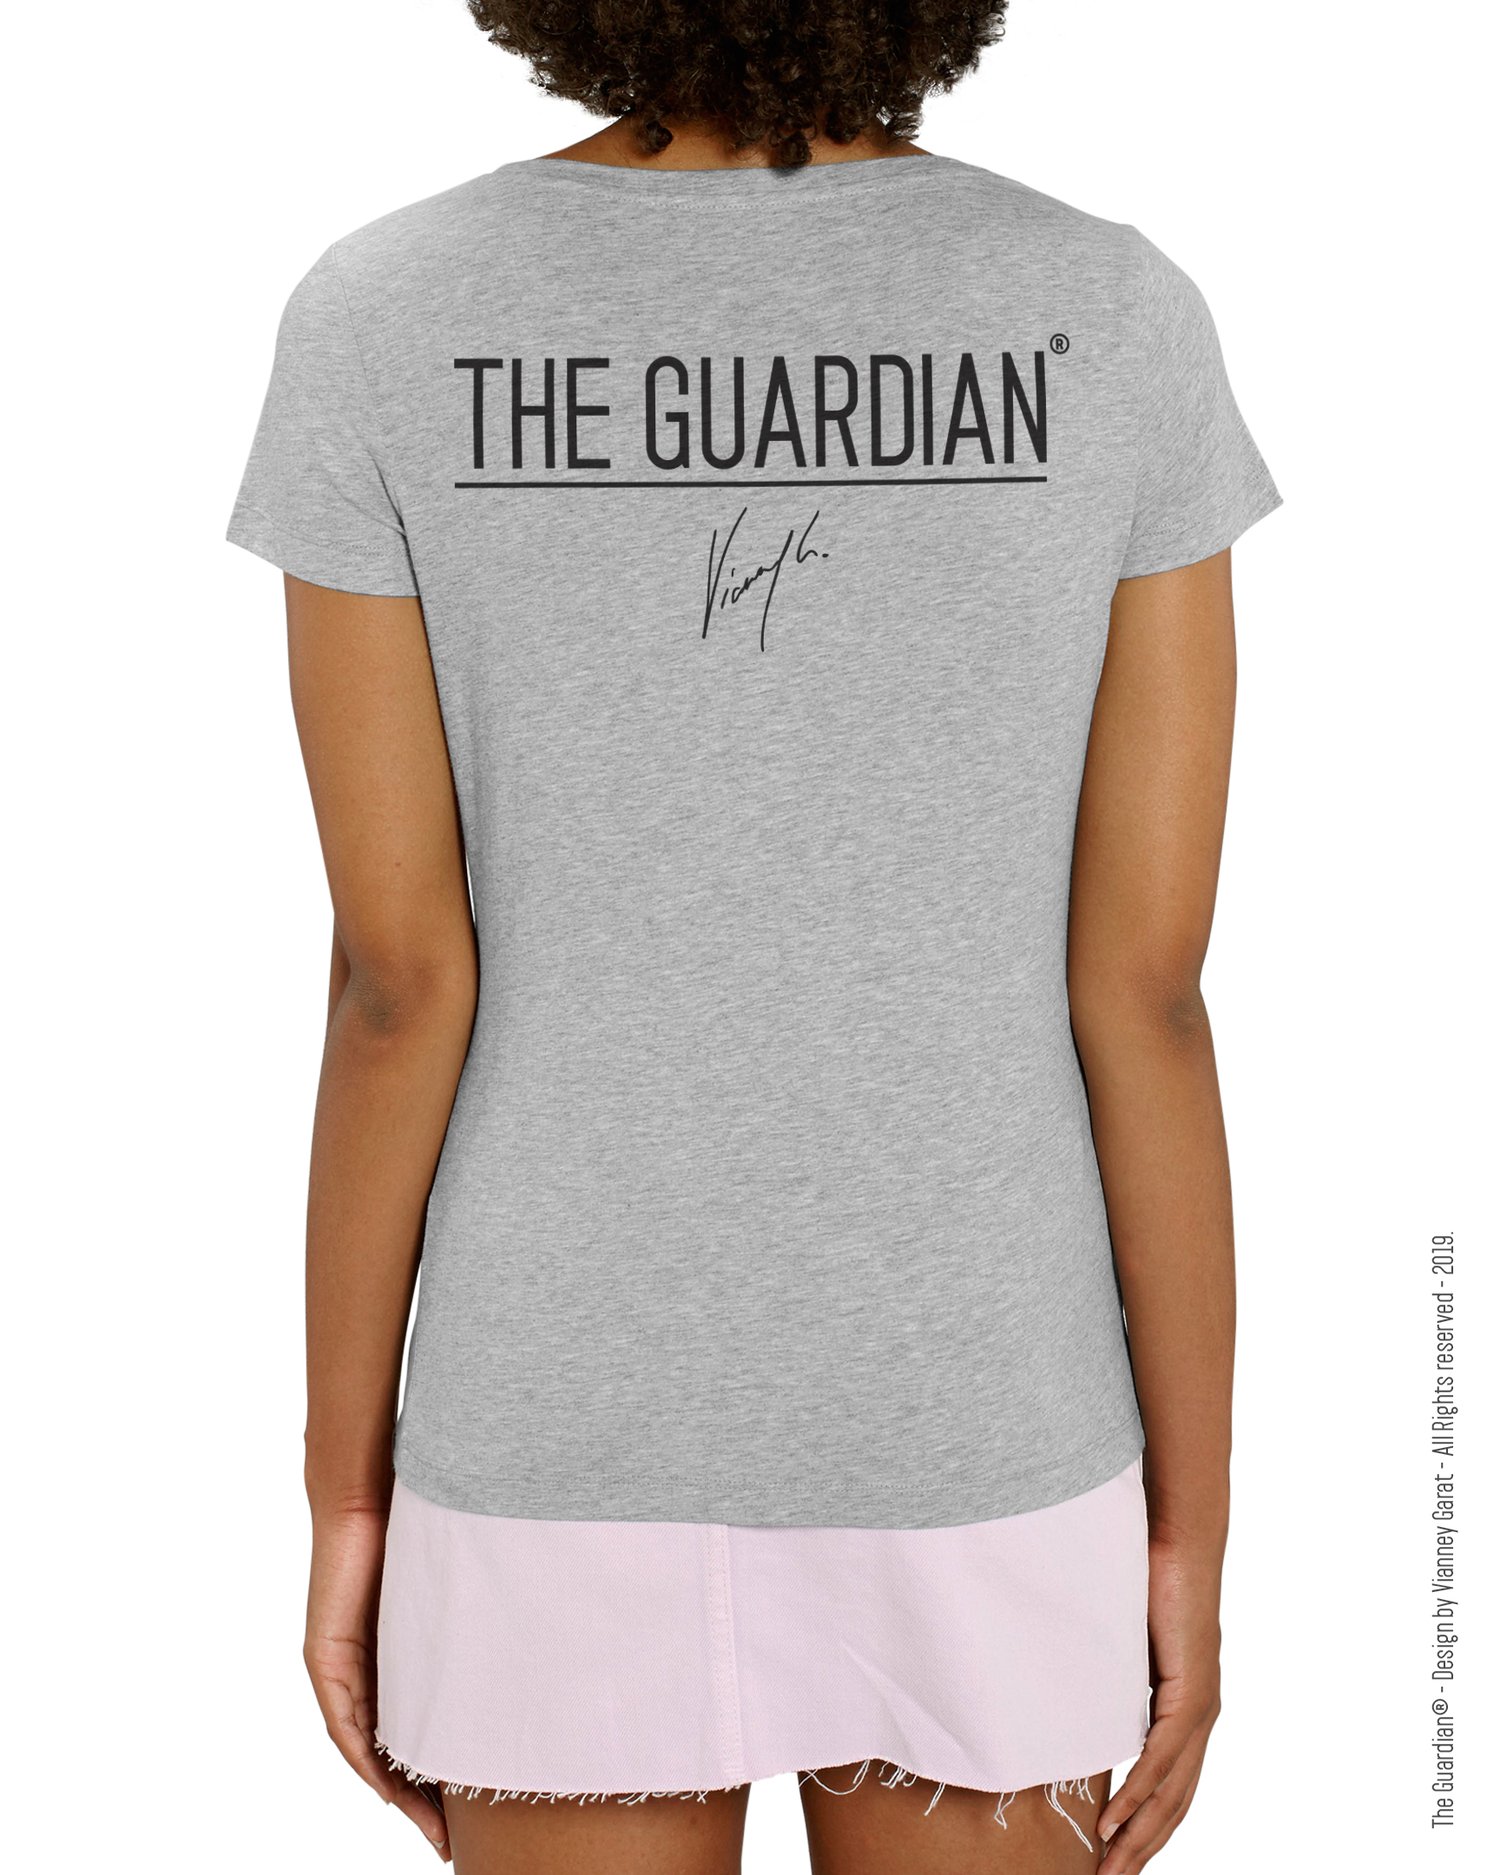 Image of T-Shirt Femme The Guardian® Light Grey Edition